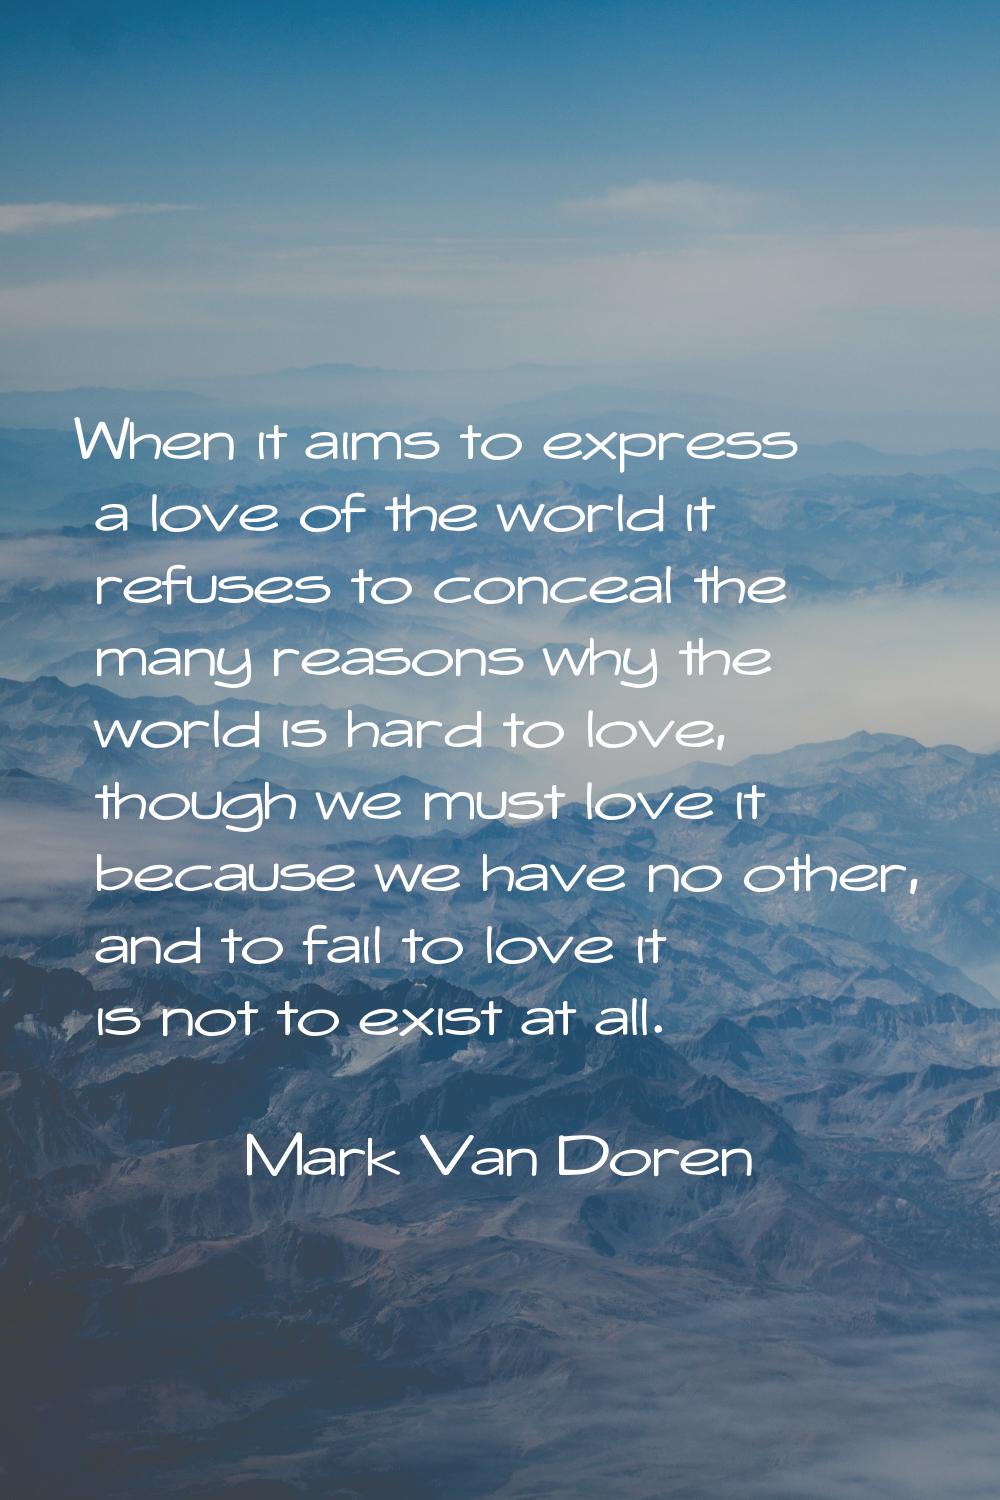 When it aims to express a love of the world it refuses to conceal the many reasons why the world is